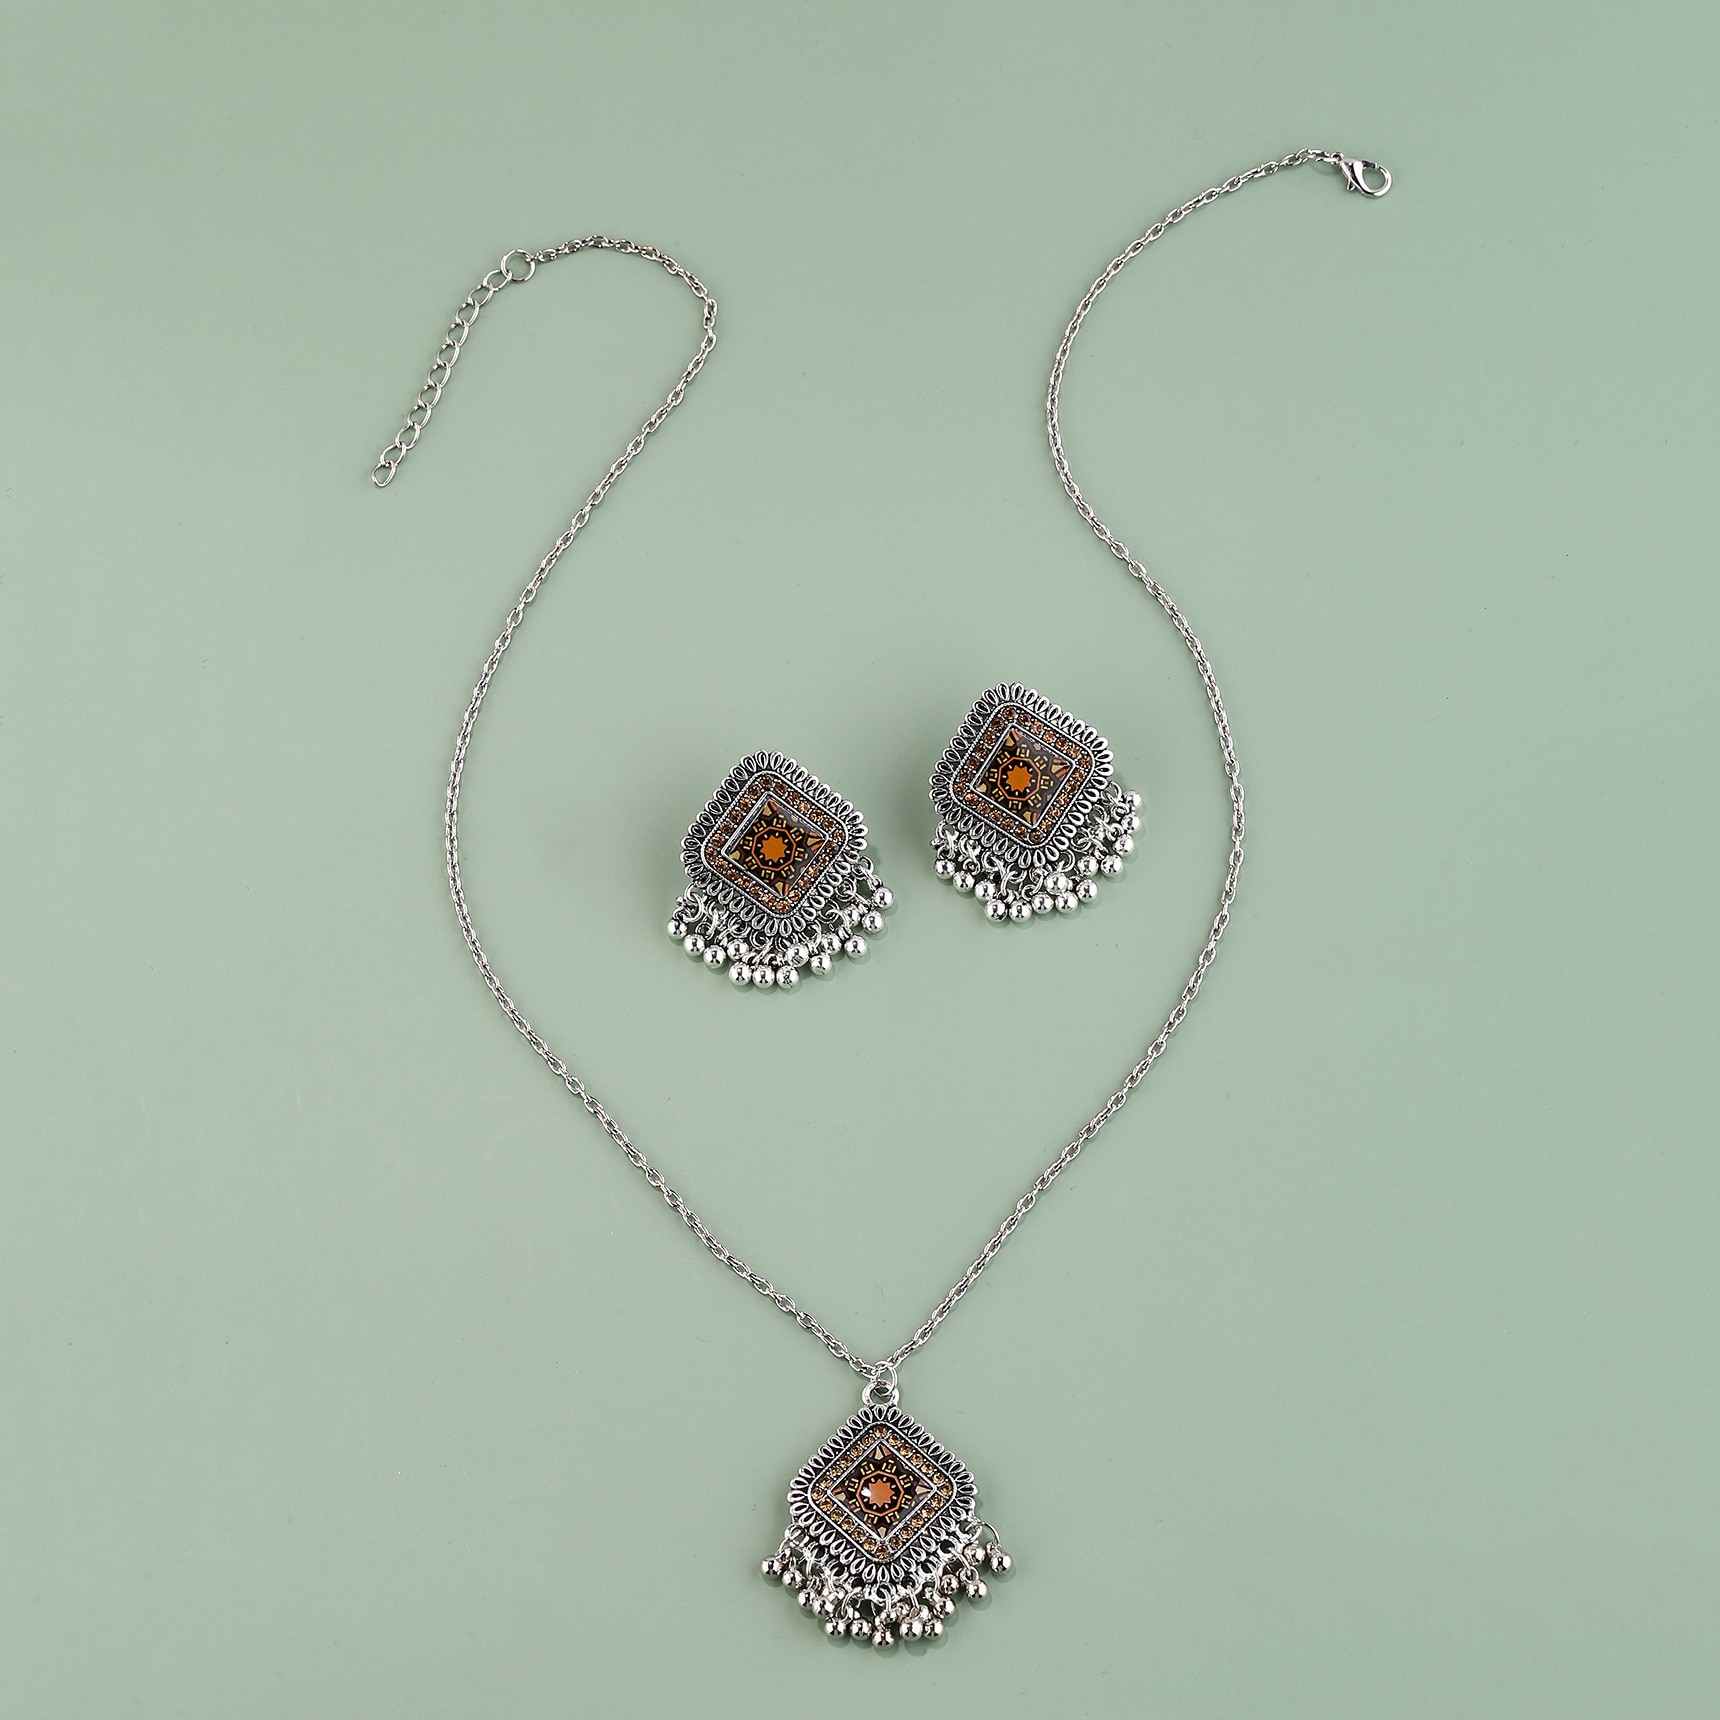 Vintage-Silver-Color-Flower-Jewelry-Sets-For-Women-Bell-Tassel-Necklaces-Earring-Bridal-Afghan-India-1005004536452730-3